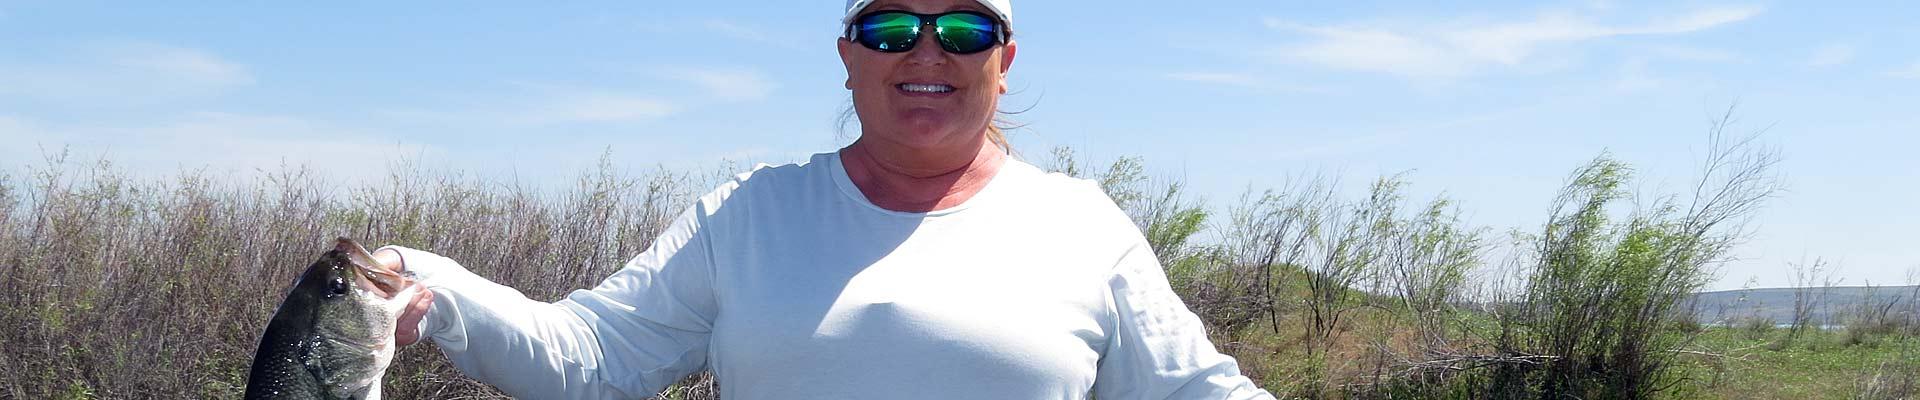 Fantastic Fishing Clothes for Women  The Ultimate Bass Fishing Resource  Guide® LLC